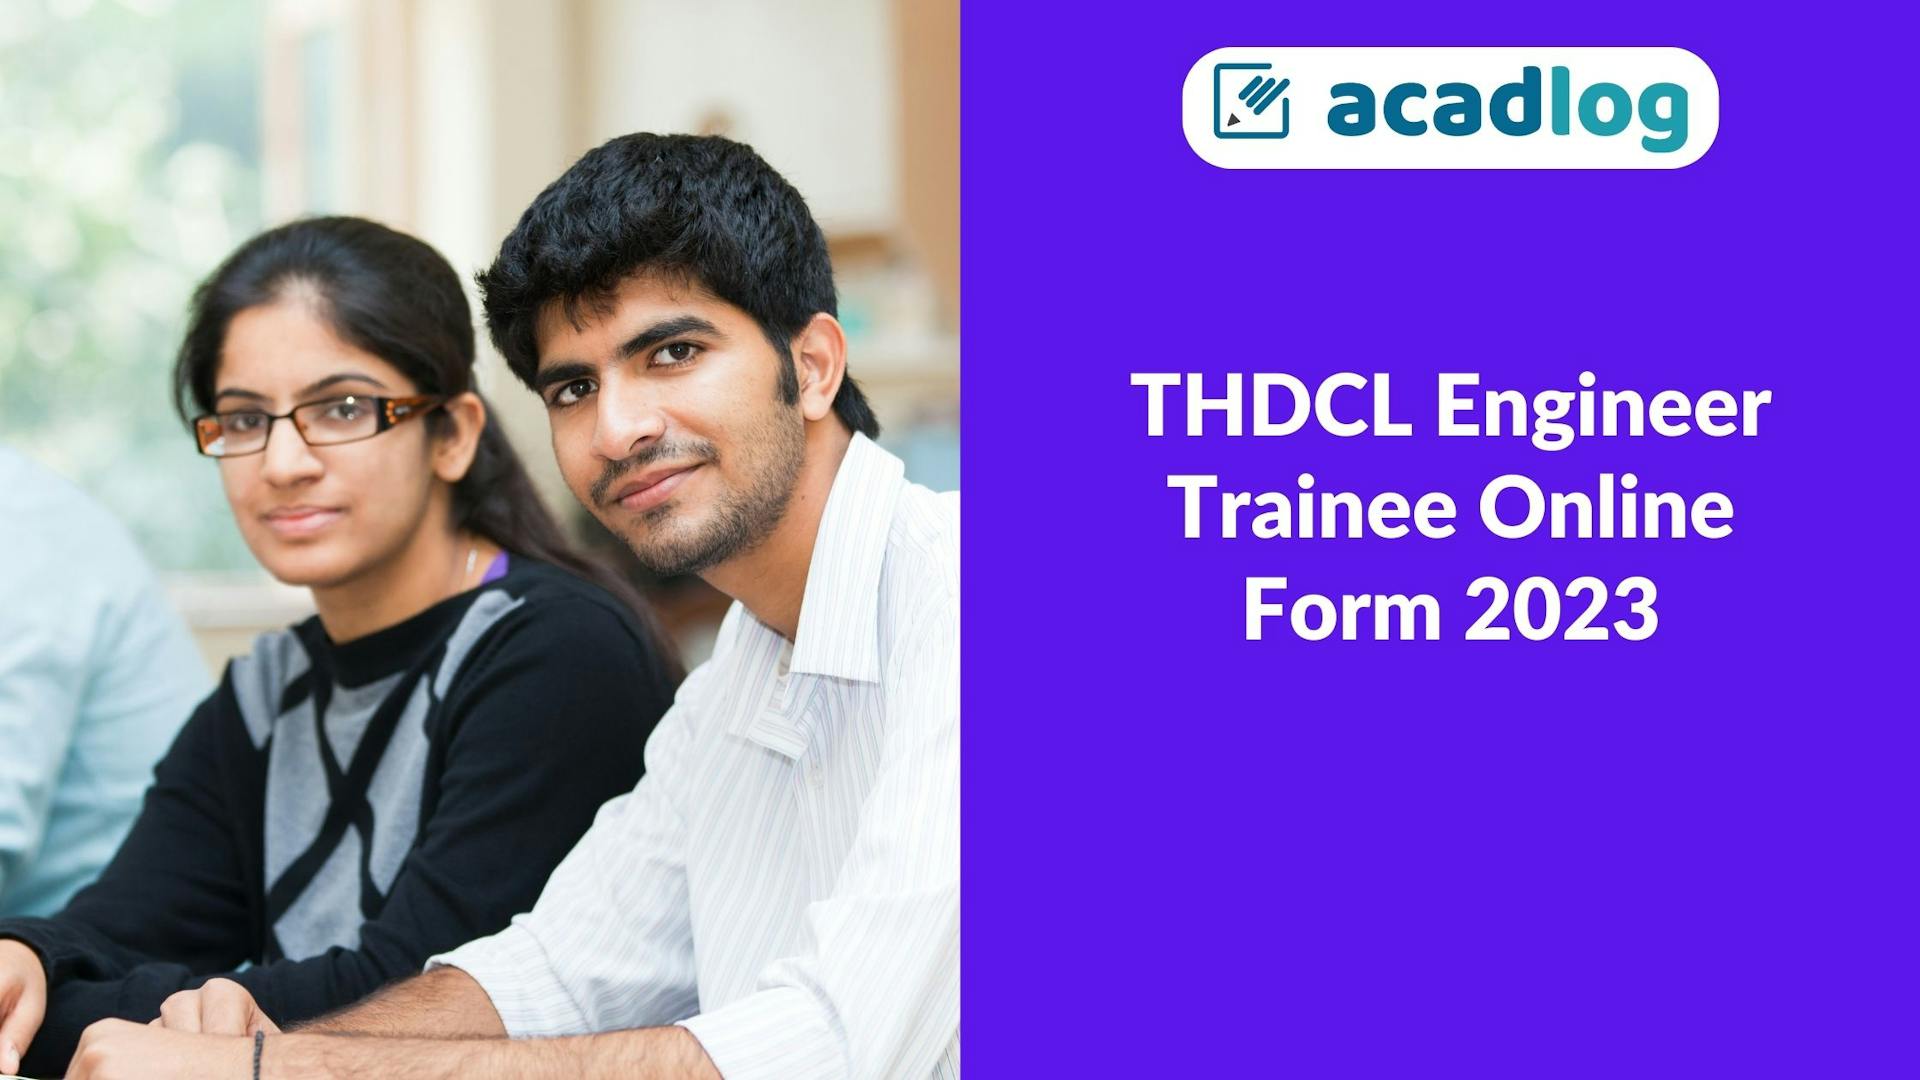 THDCL Engineer Trainee Online Form 2023